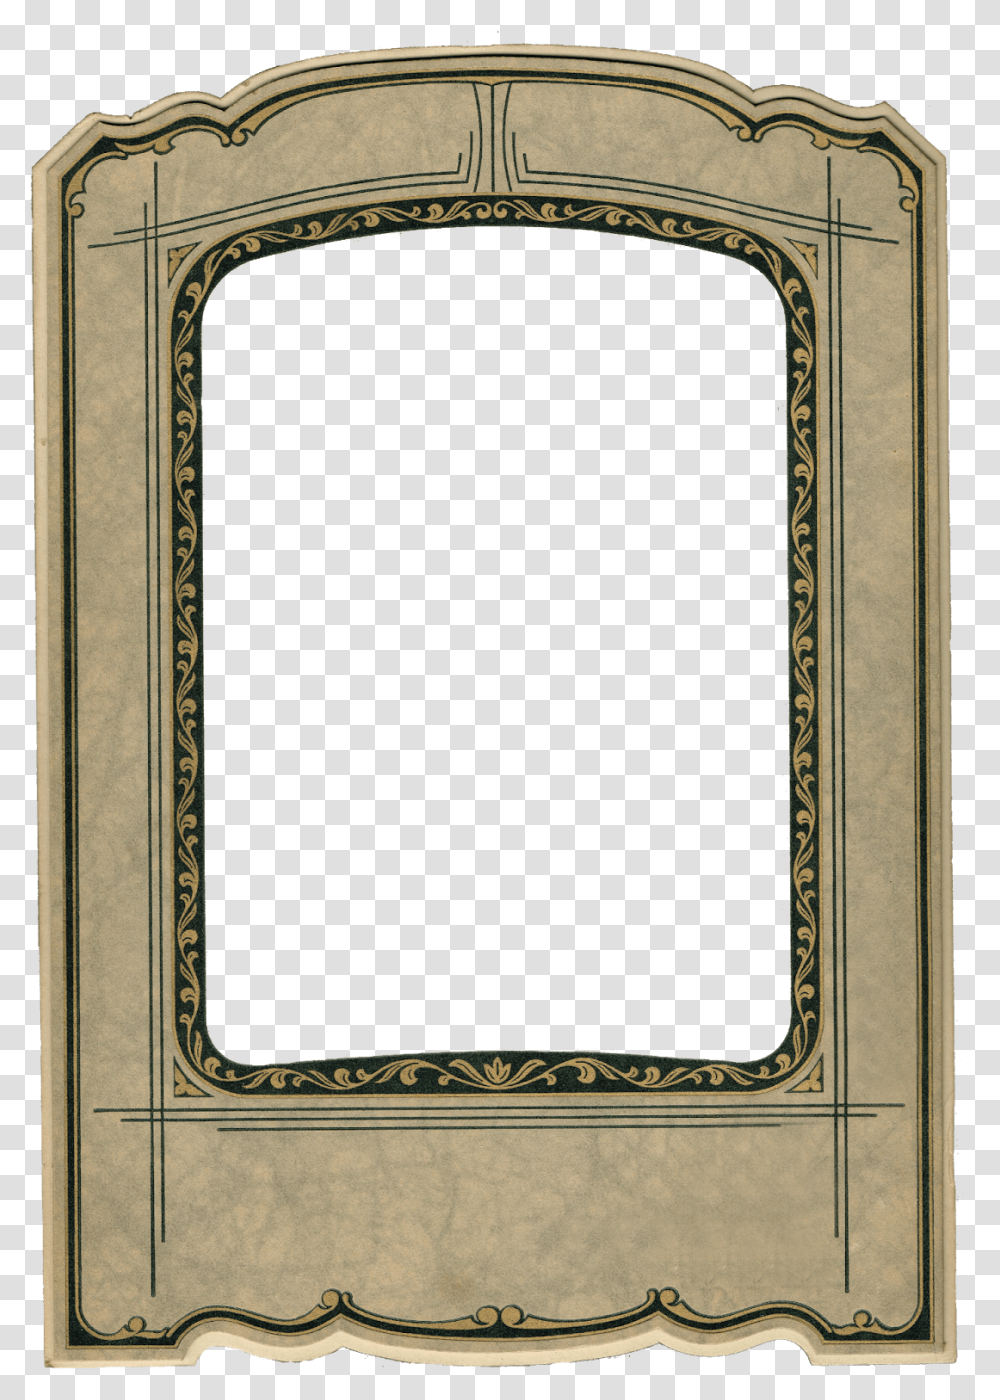 Antique Photo Frame Free Clipart Printable Graphics Antique Cardboard Photo Frame, Rug, Painting, Screen Transparent Png